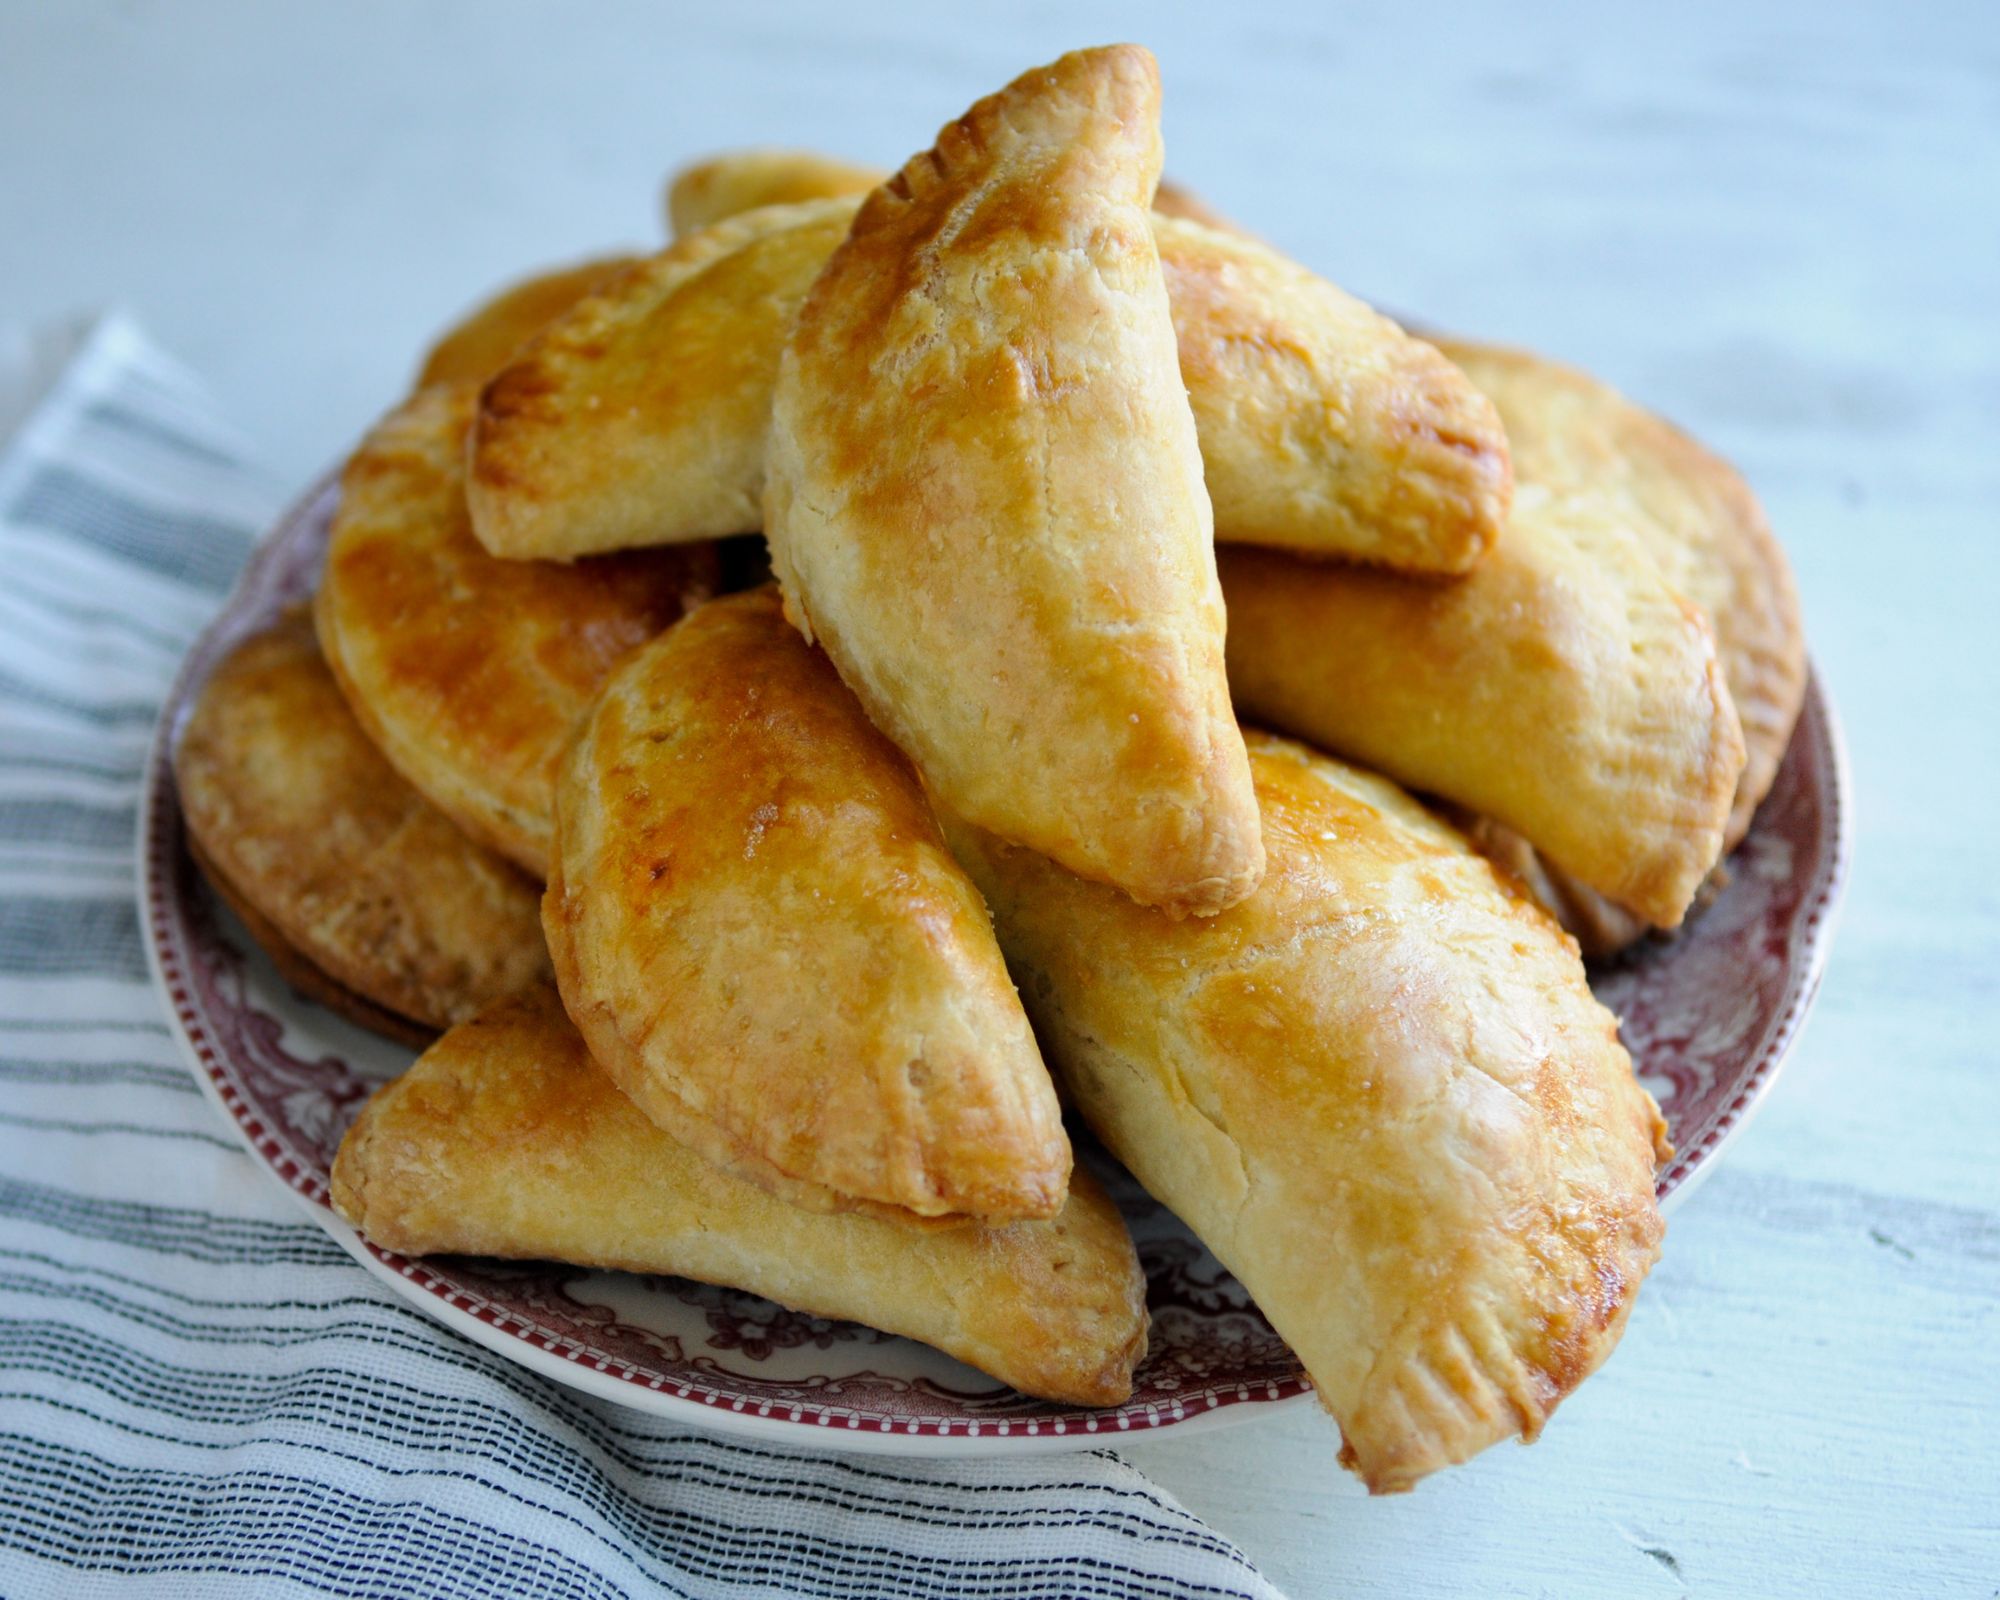 baked empanadas stacked on a plate